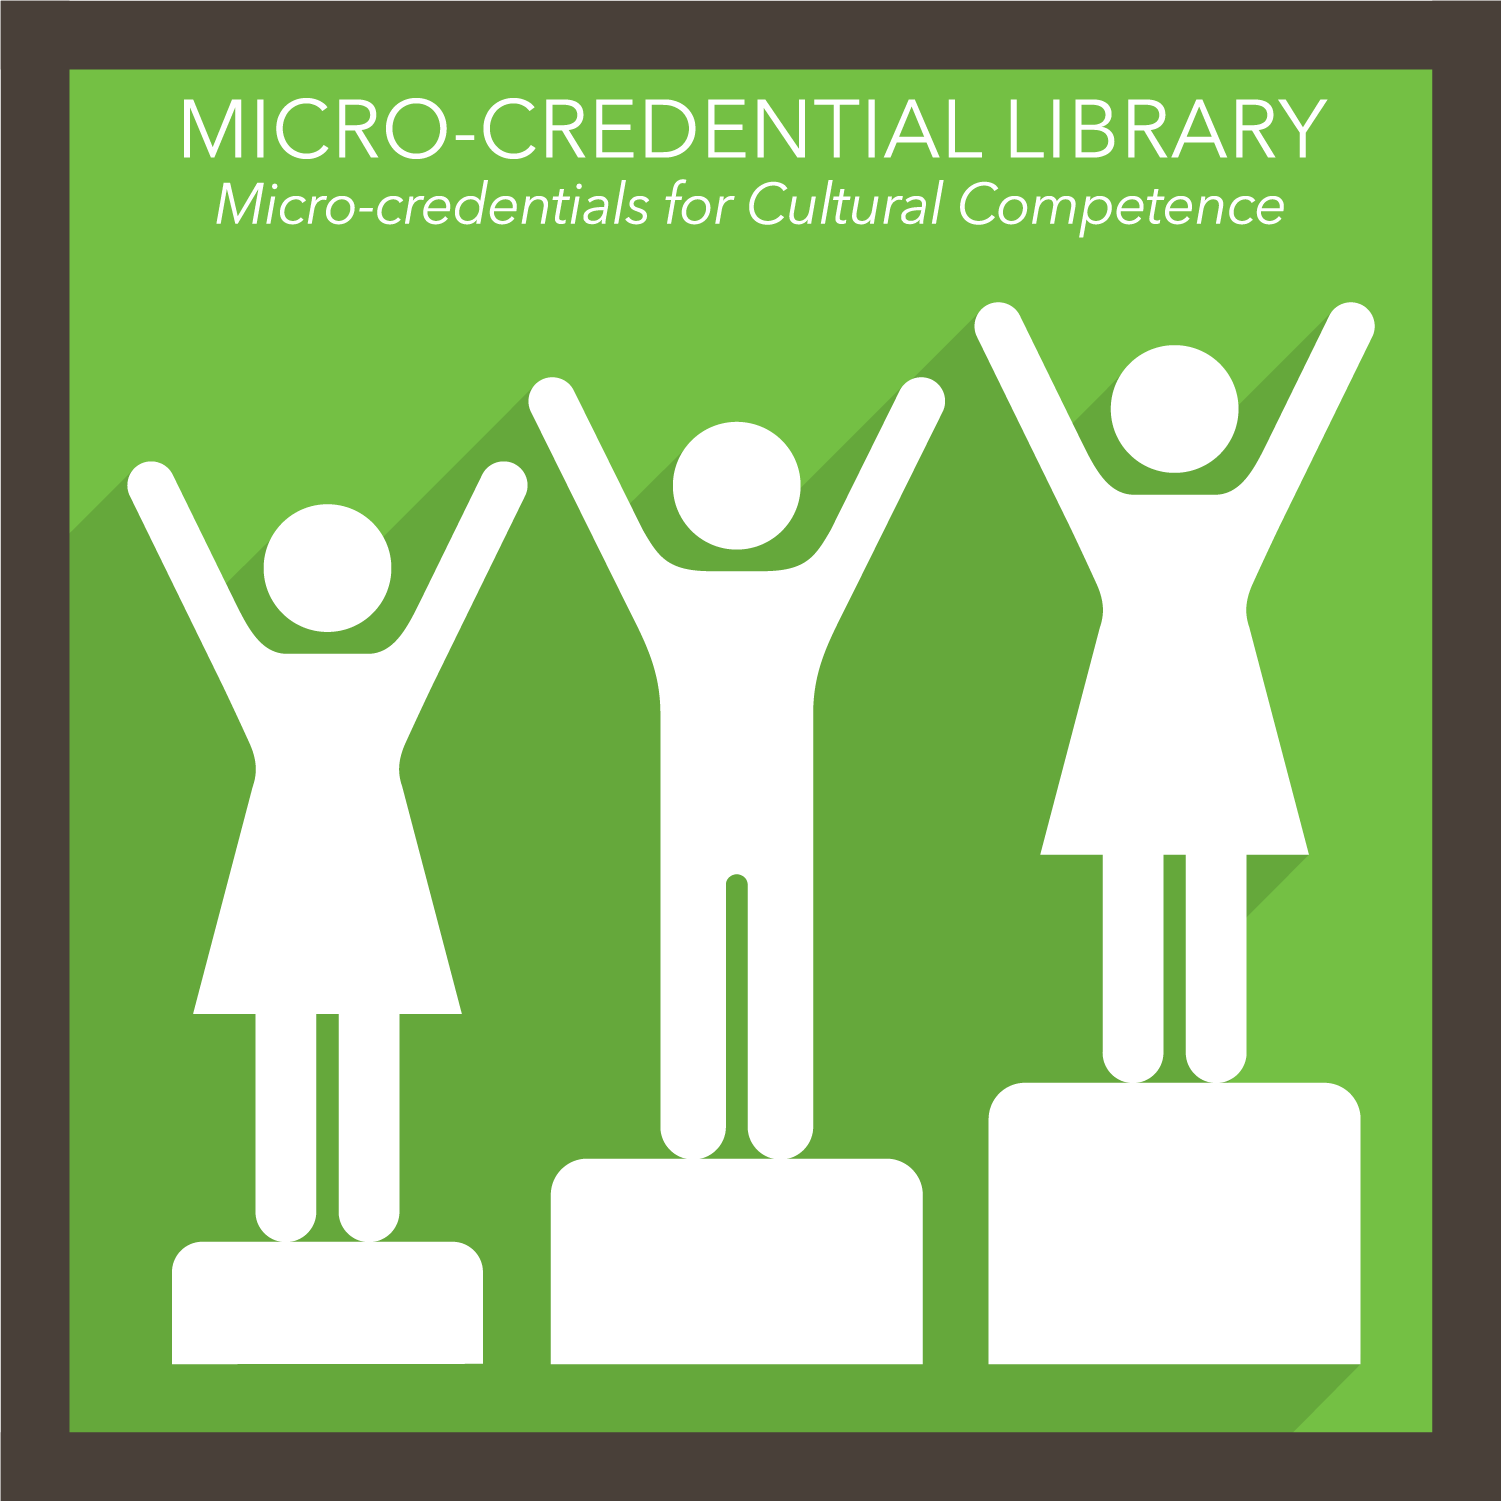 Micro-credentials That Support Cultural Competence and Equity